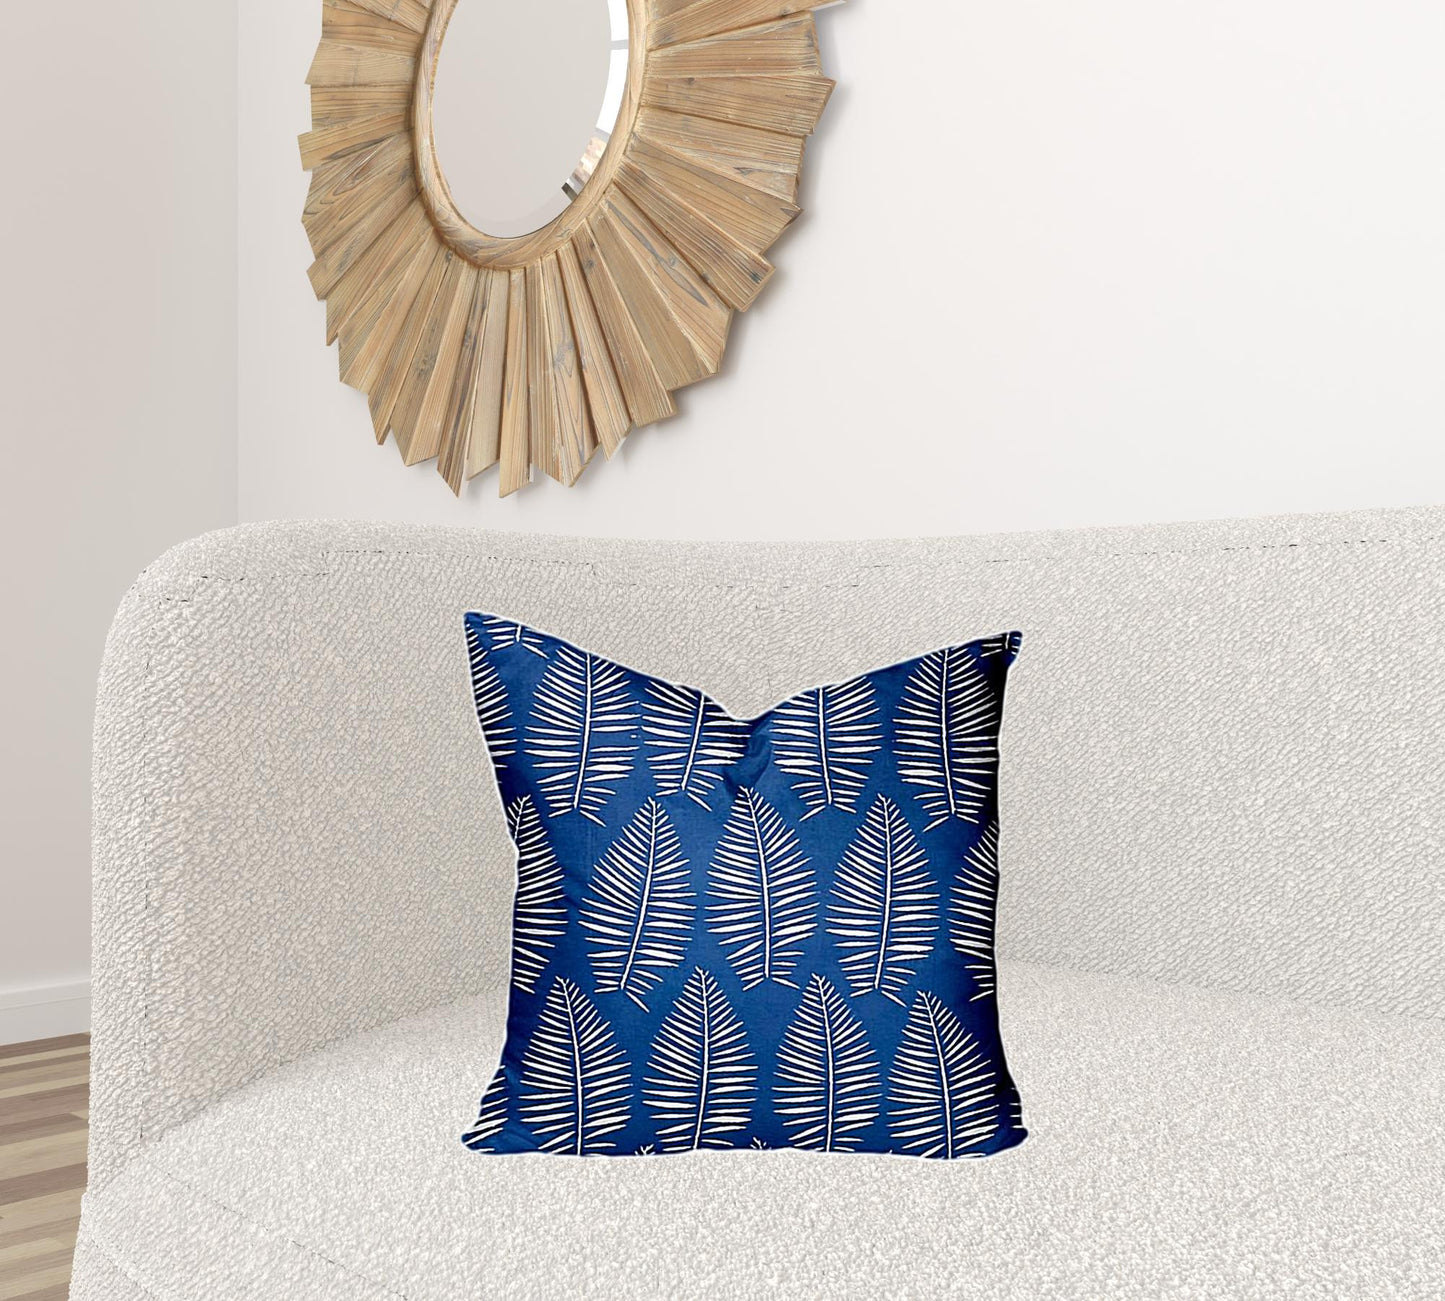 20" X 20" Blue And White Enveloped Tropical Throw Indoor Outdoor Pillow